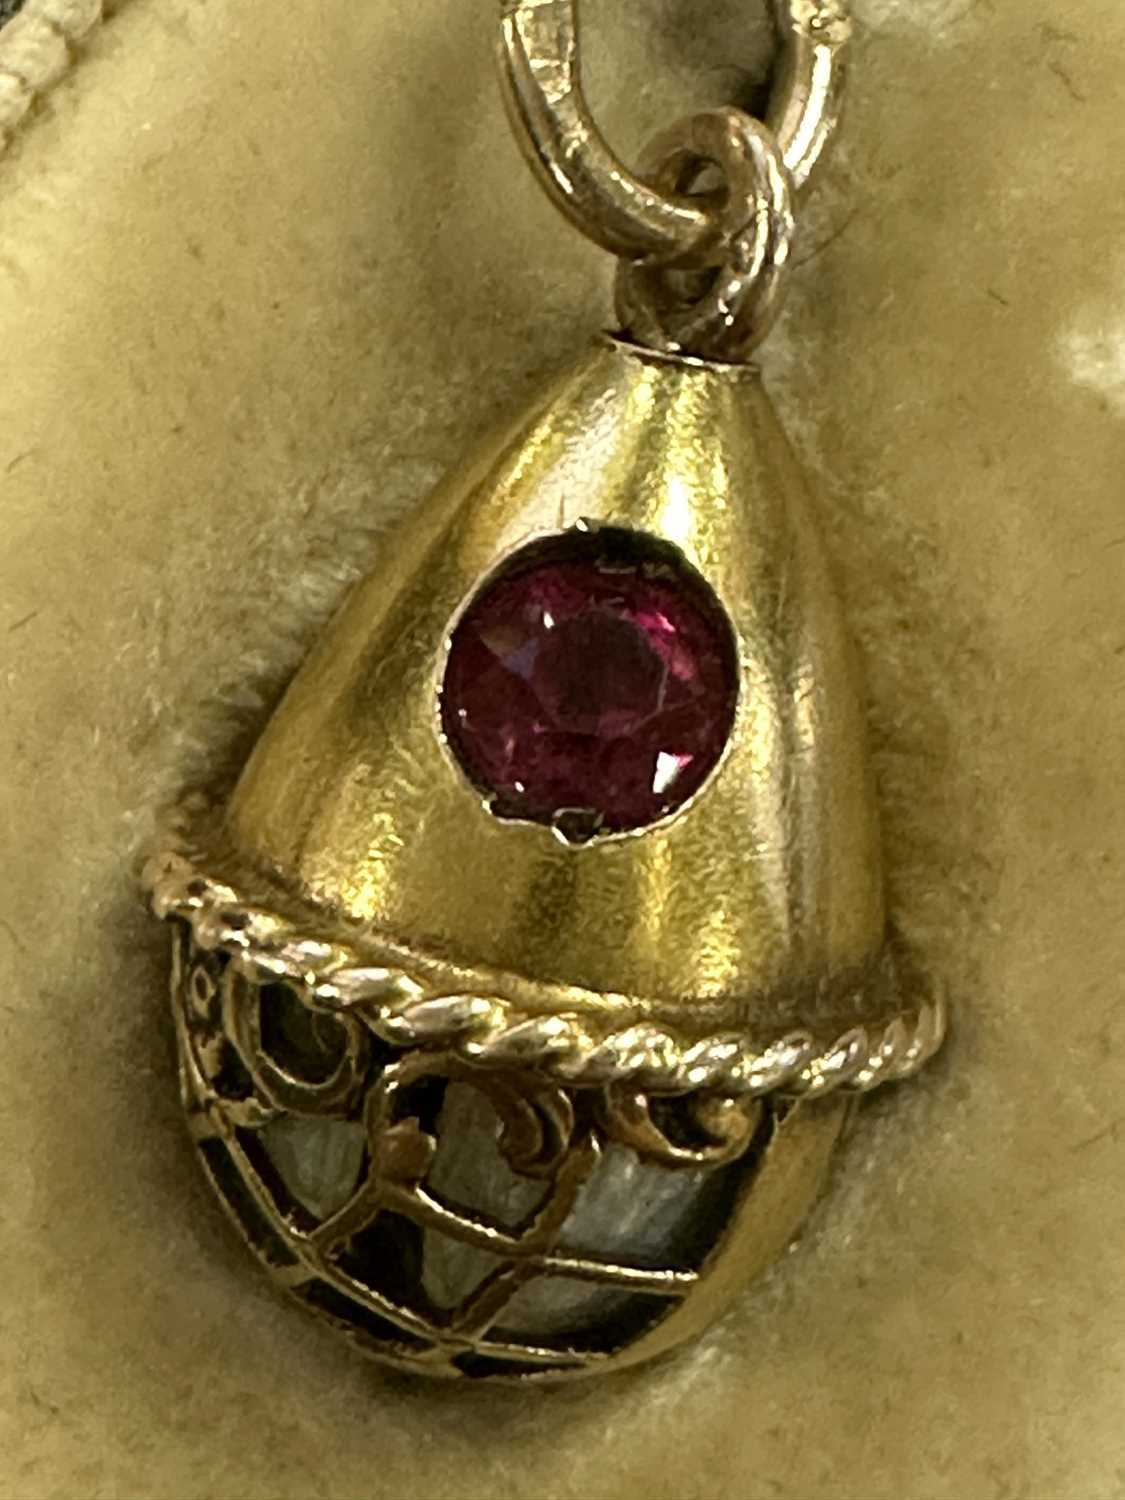 A LATE 19TH CENTURY FABERGE 14CT GOLD ENAMEL AND RUBY PENDANT EGG, WORKMASTER HENRIK WIGSTROM - Image 11 of 16